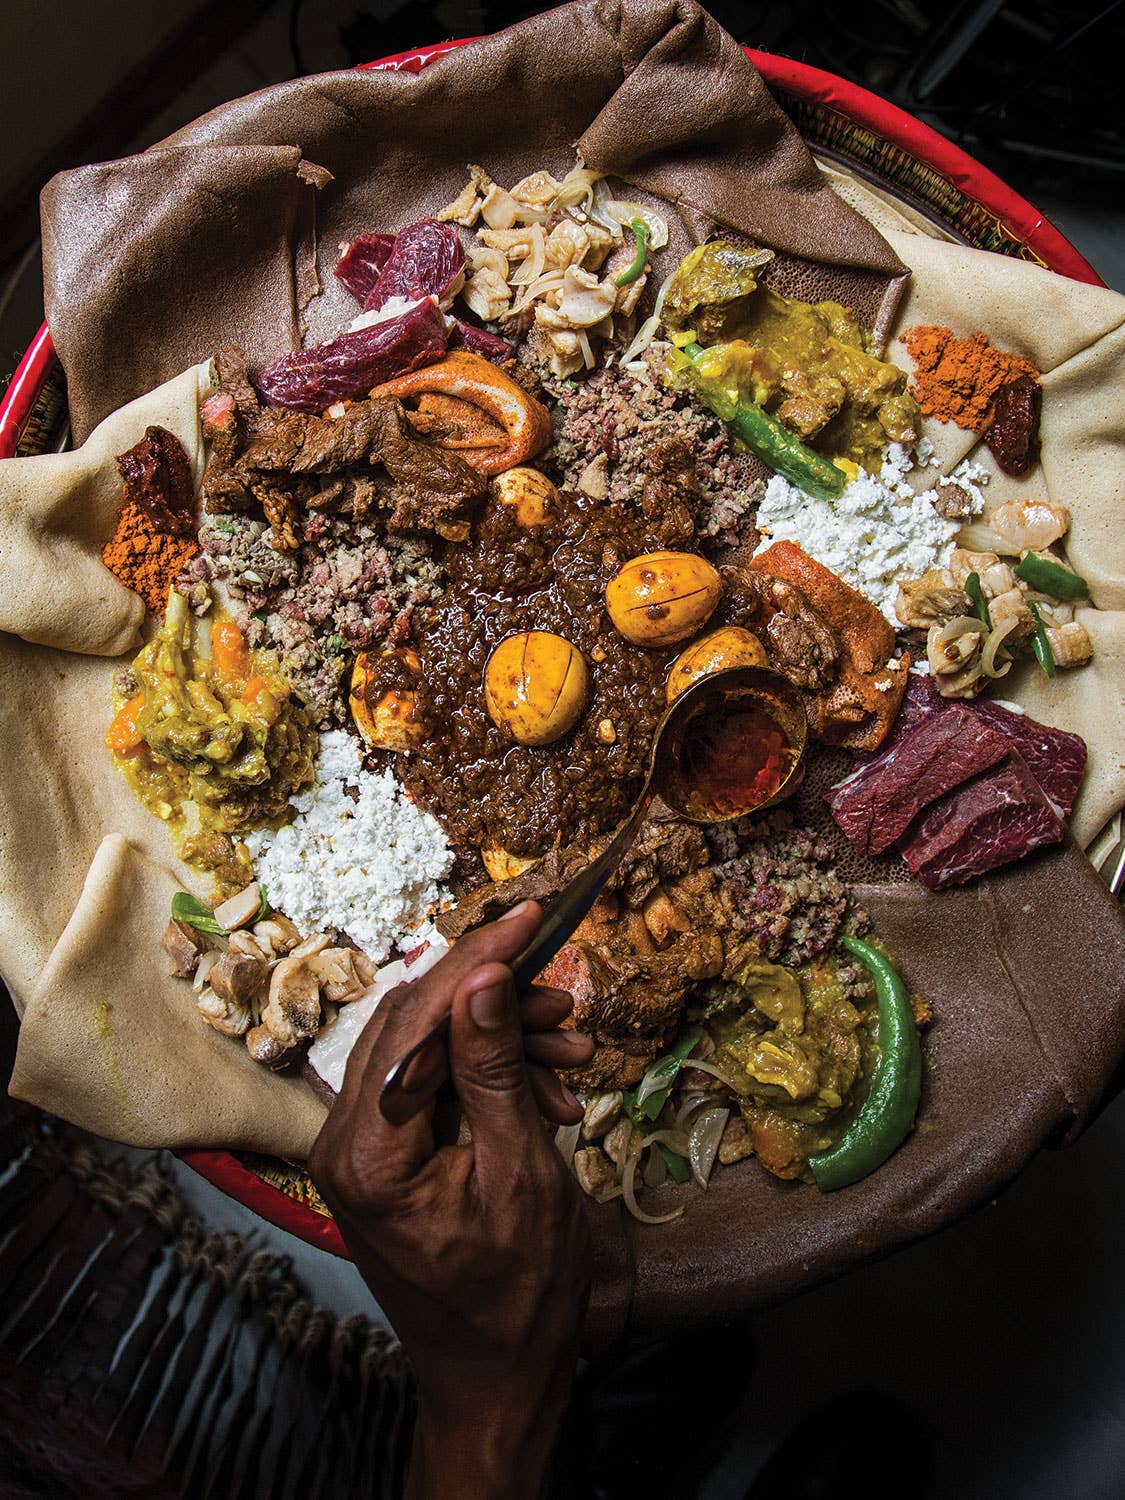 This Epic Meat Feast Is How Ethiopians Celebrate Easter